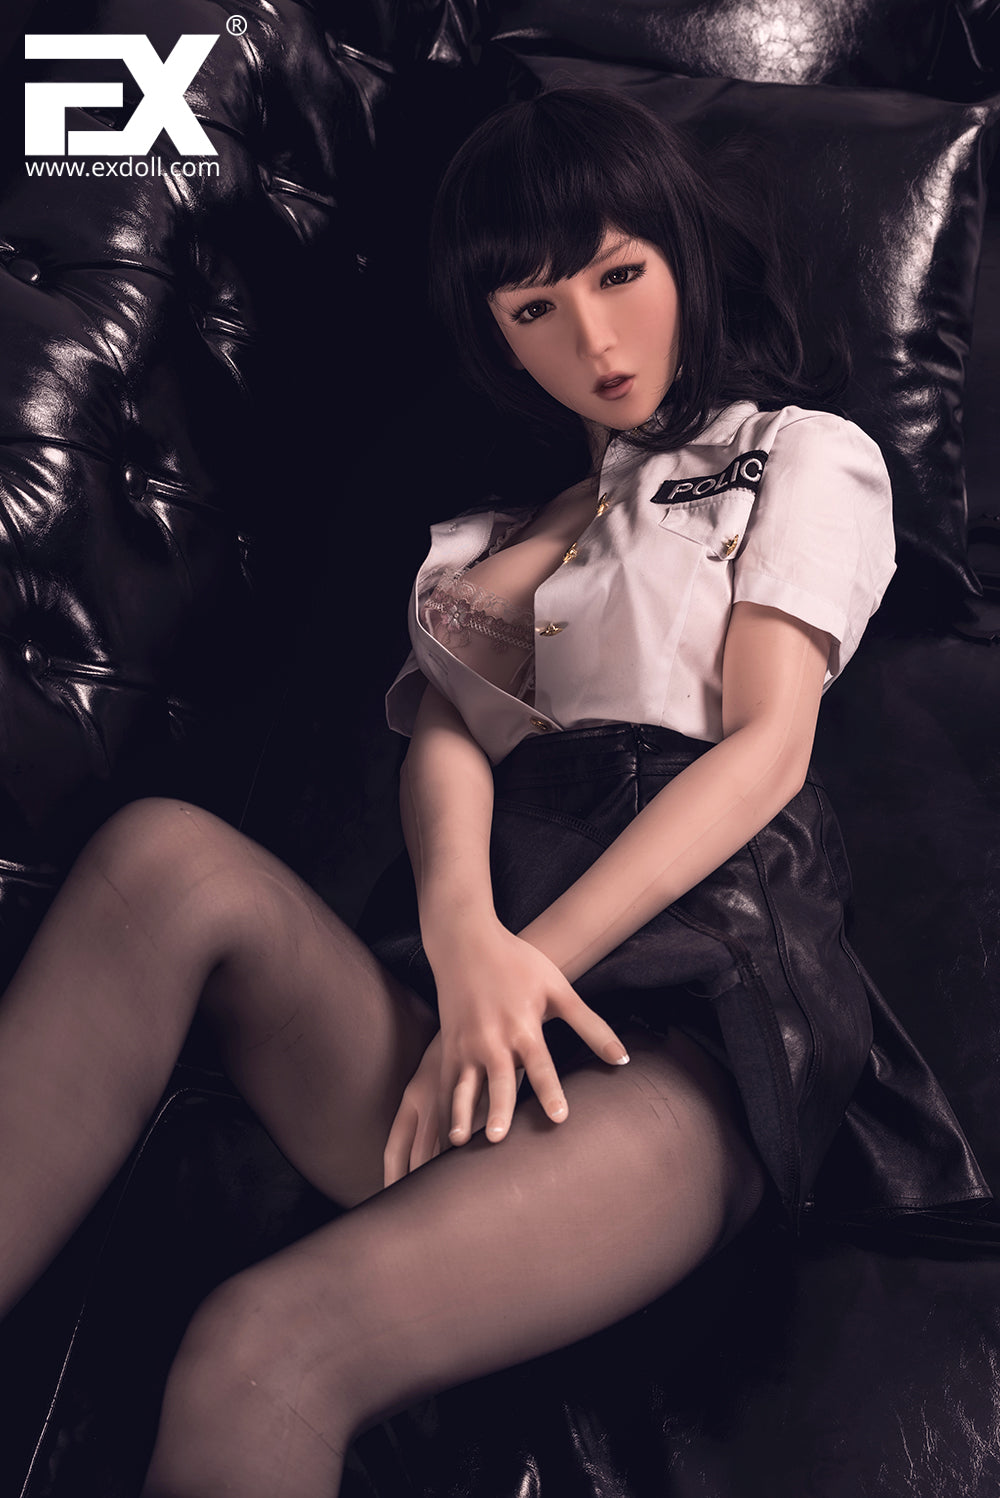 EX Doll Ukiyoe Series 170 cm Silicone - Seung Hee | Buy Sex Dolls at DOLLS ACTUALLY